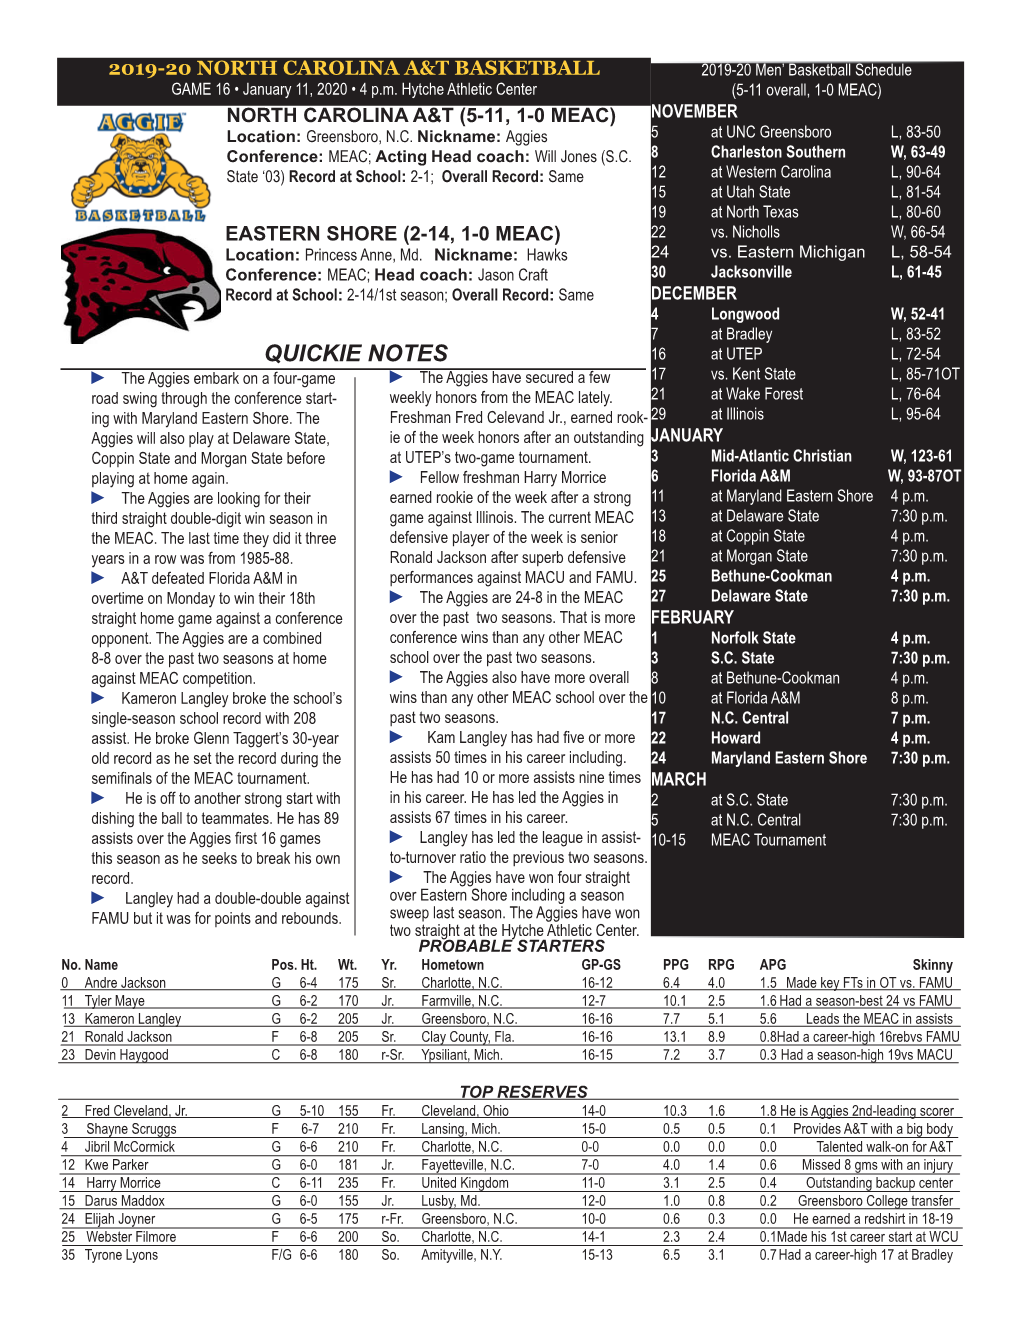 Aggie Game Notes